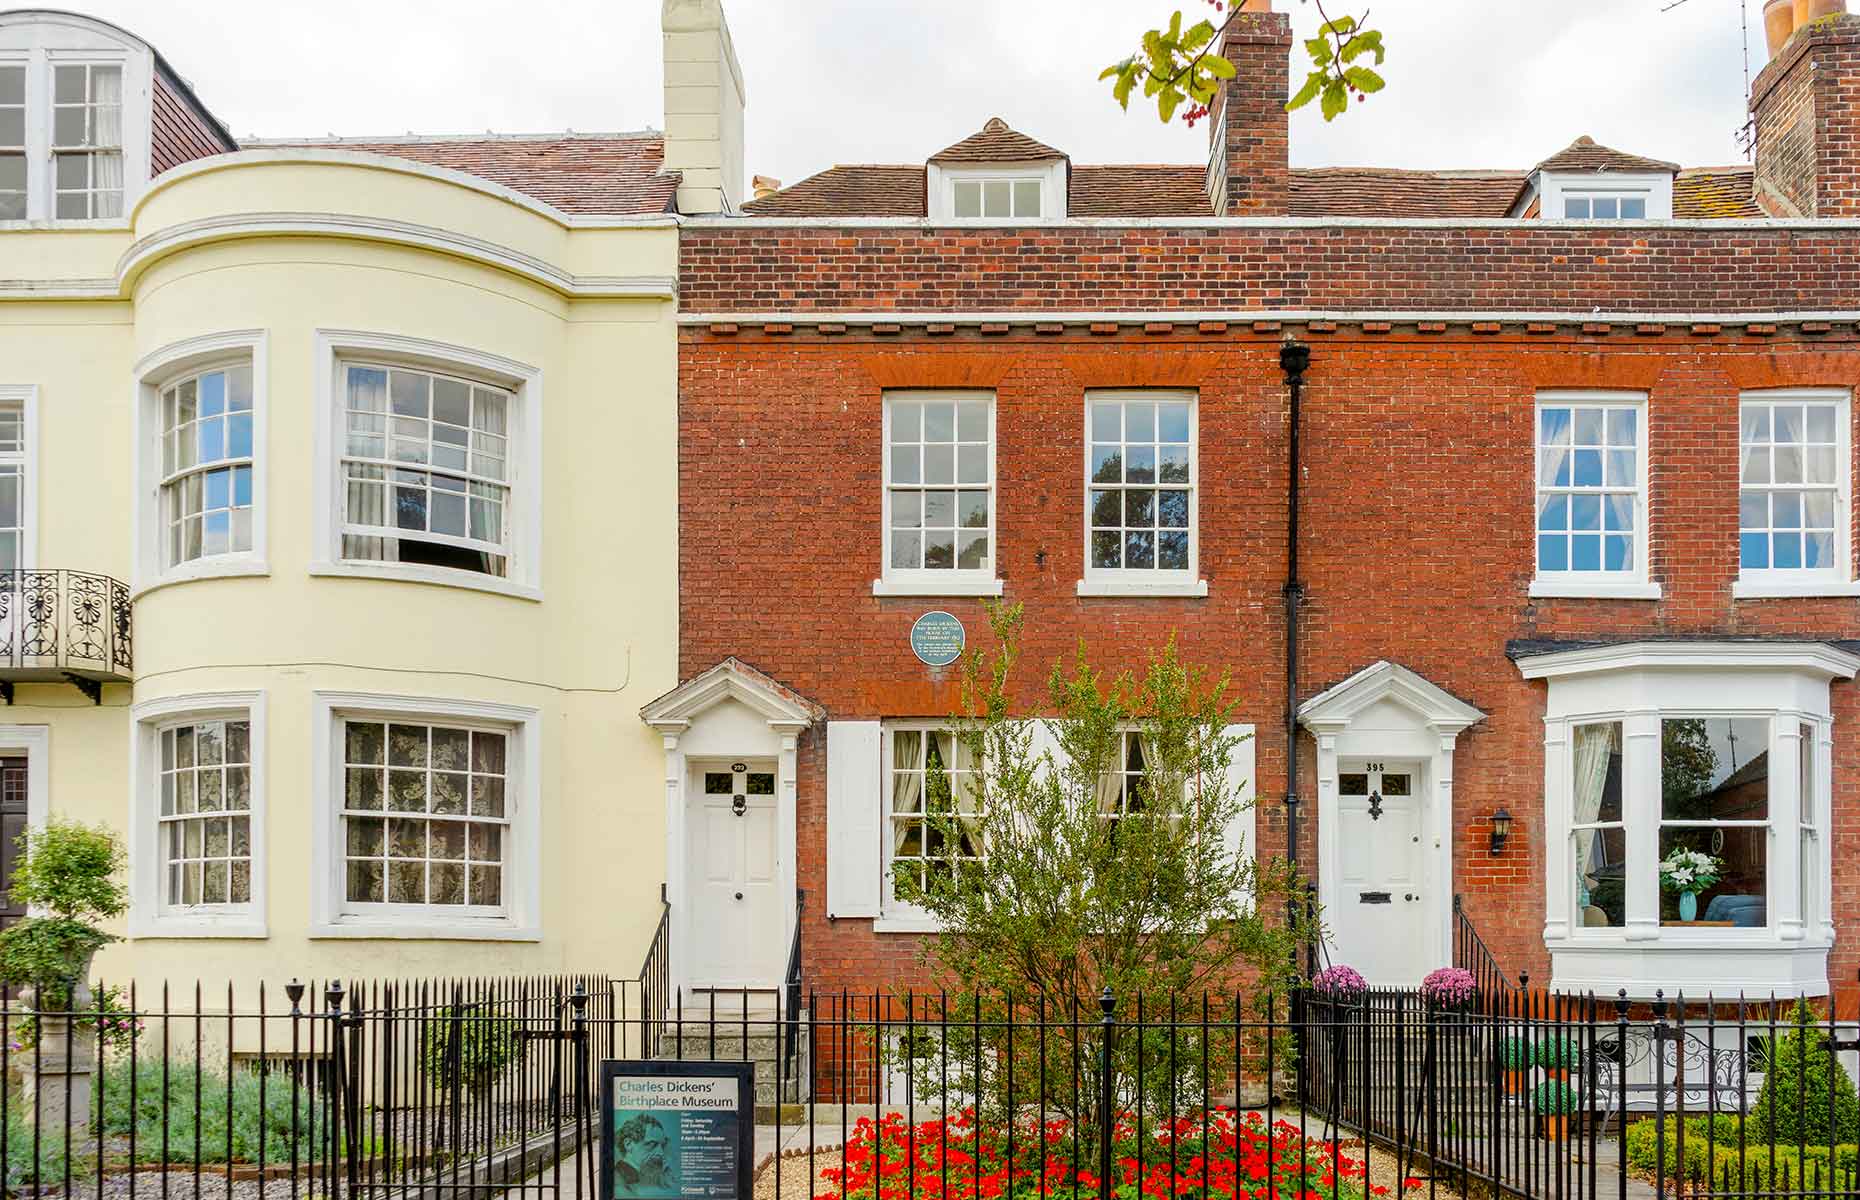 Charles Dickens Birthplace (Image credit: Sopotnicki/Shutterstock)